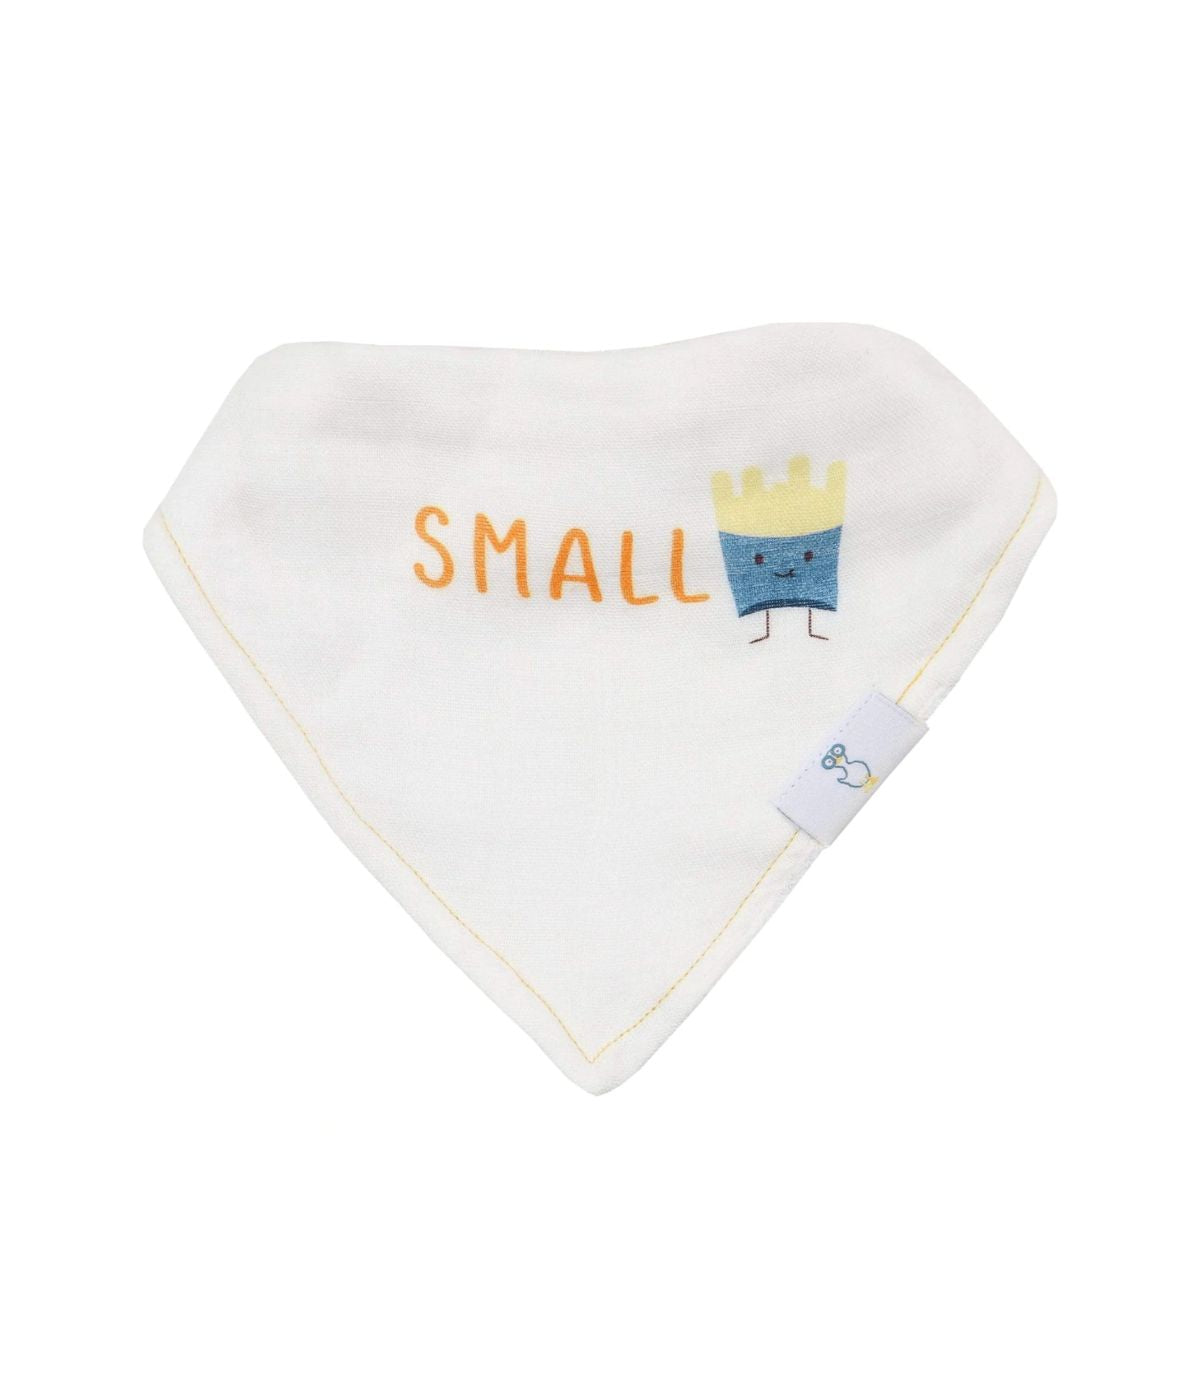 Small Fry and Burgers and Fries 2 Pack Muslin & Terry Cloth Bib Set White/Blue/Yellow/Red